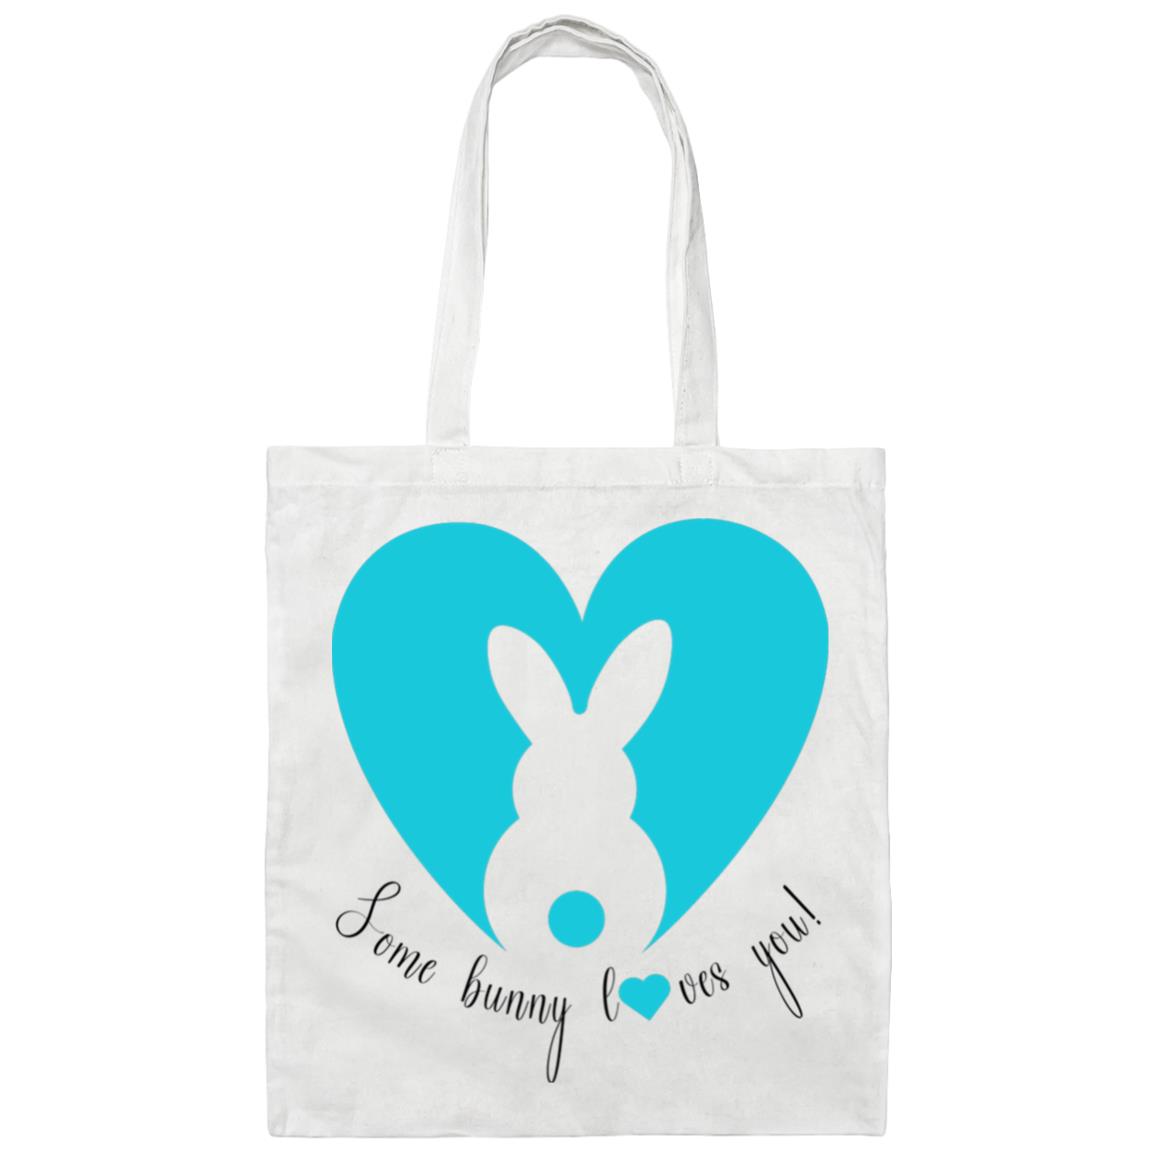 Some Bunny Loves You - Tote Bags Various Colors